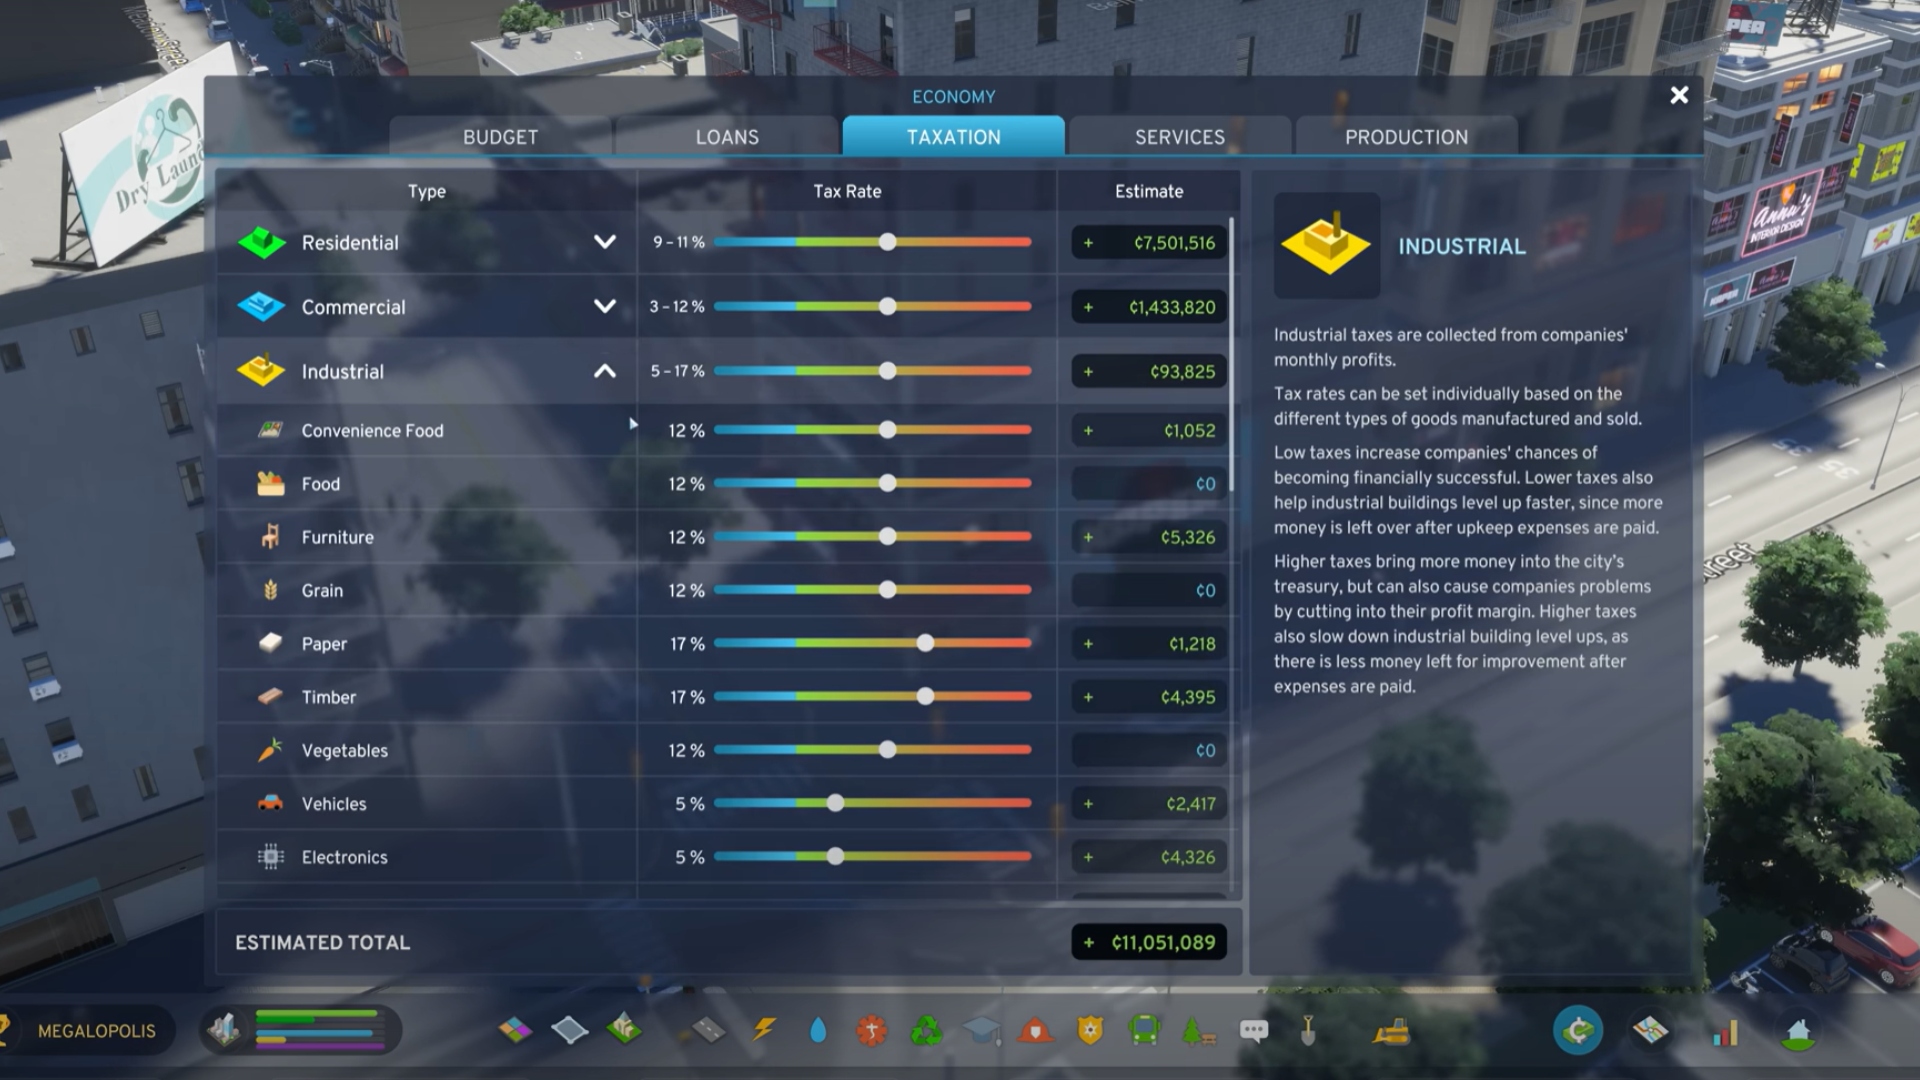 Cities Skylines 2 economy: A list of taxable products in city-building game Cities Skylines 2